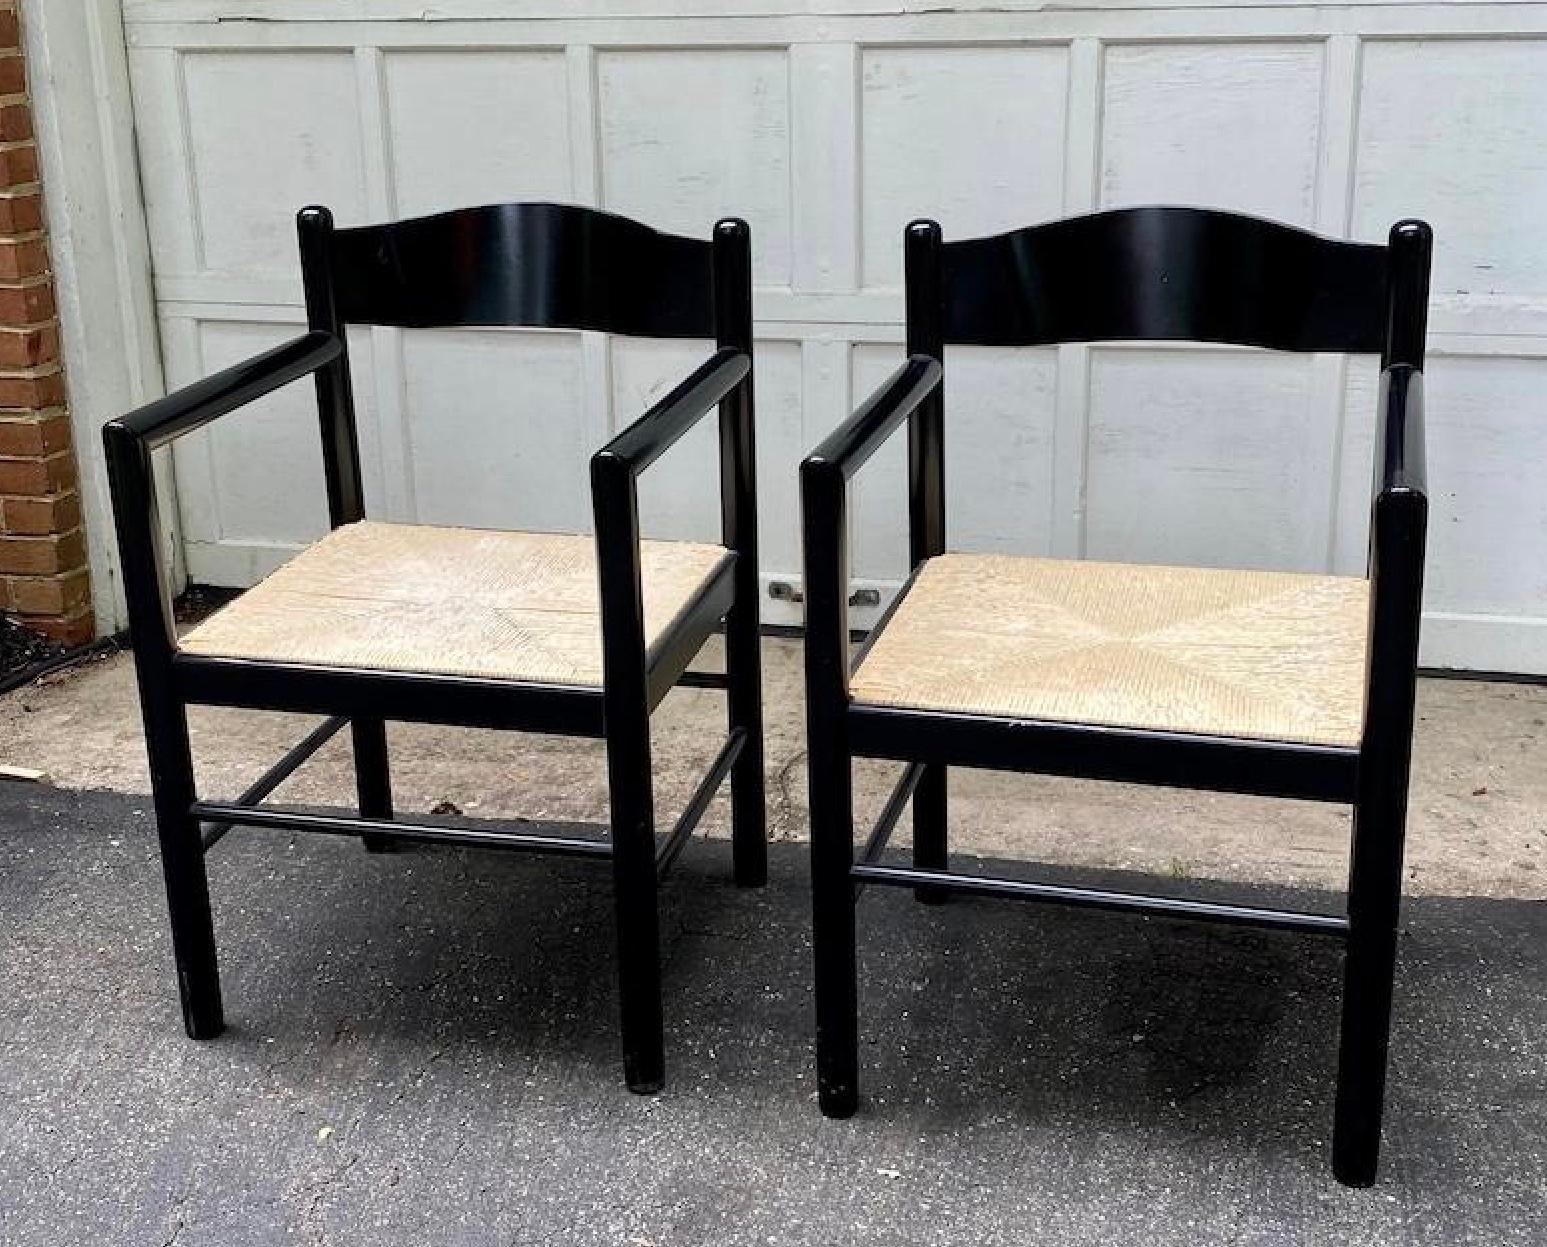 A pair of stunning black lacquer ebonized acorn armchairs or dining chairs designed by Massimo and Lella Vignelli. These mid-century modern chairs, crafted in Italy, boast a birch frame with rounded arms, supports, and legs. The seat is generously